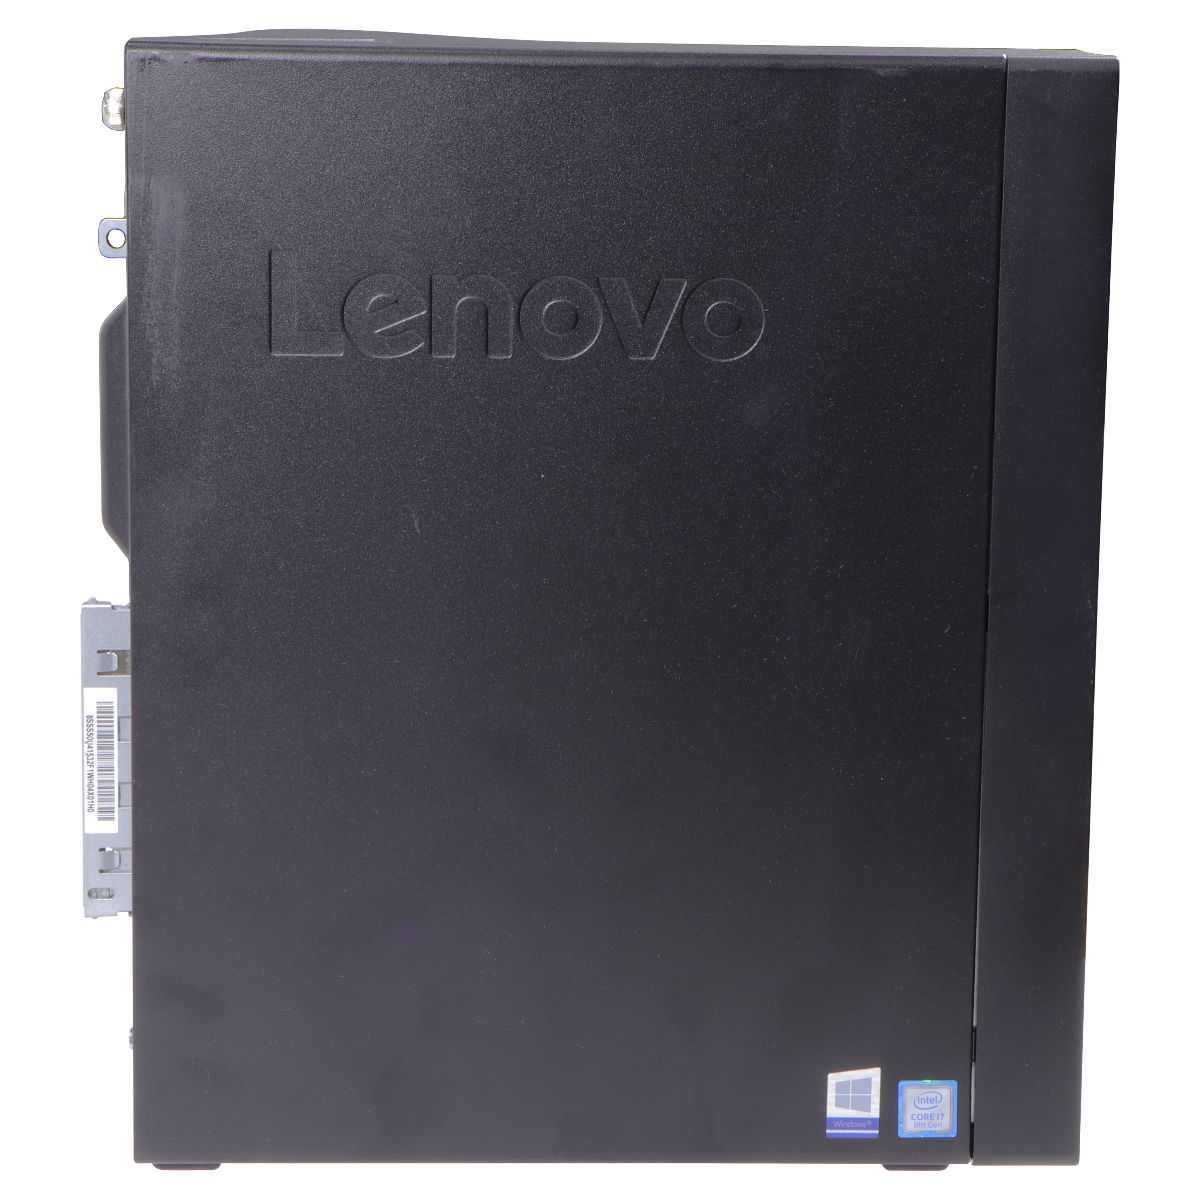 Lenovo ThinkStation P330 (2nd Gen) i7-9700/16 GB/1TB HDD/512 GB HDD/10 Home PC Desktops & All-In-Ones Lenovo    - Simple Cell Bulk Wholesale Pricing - USA Seller